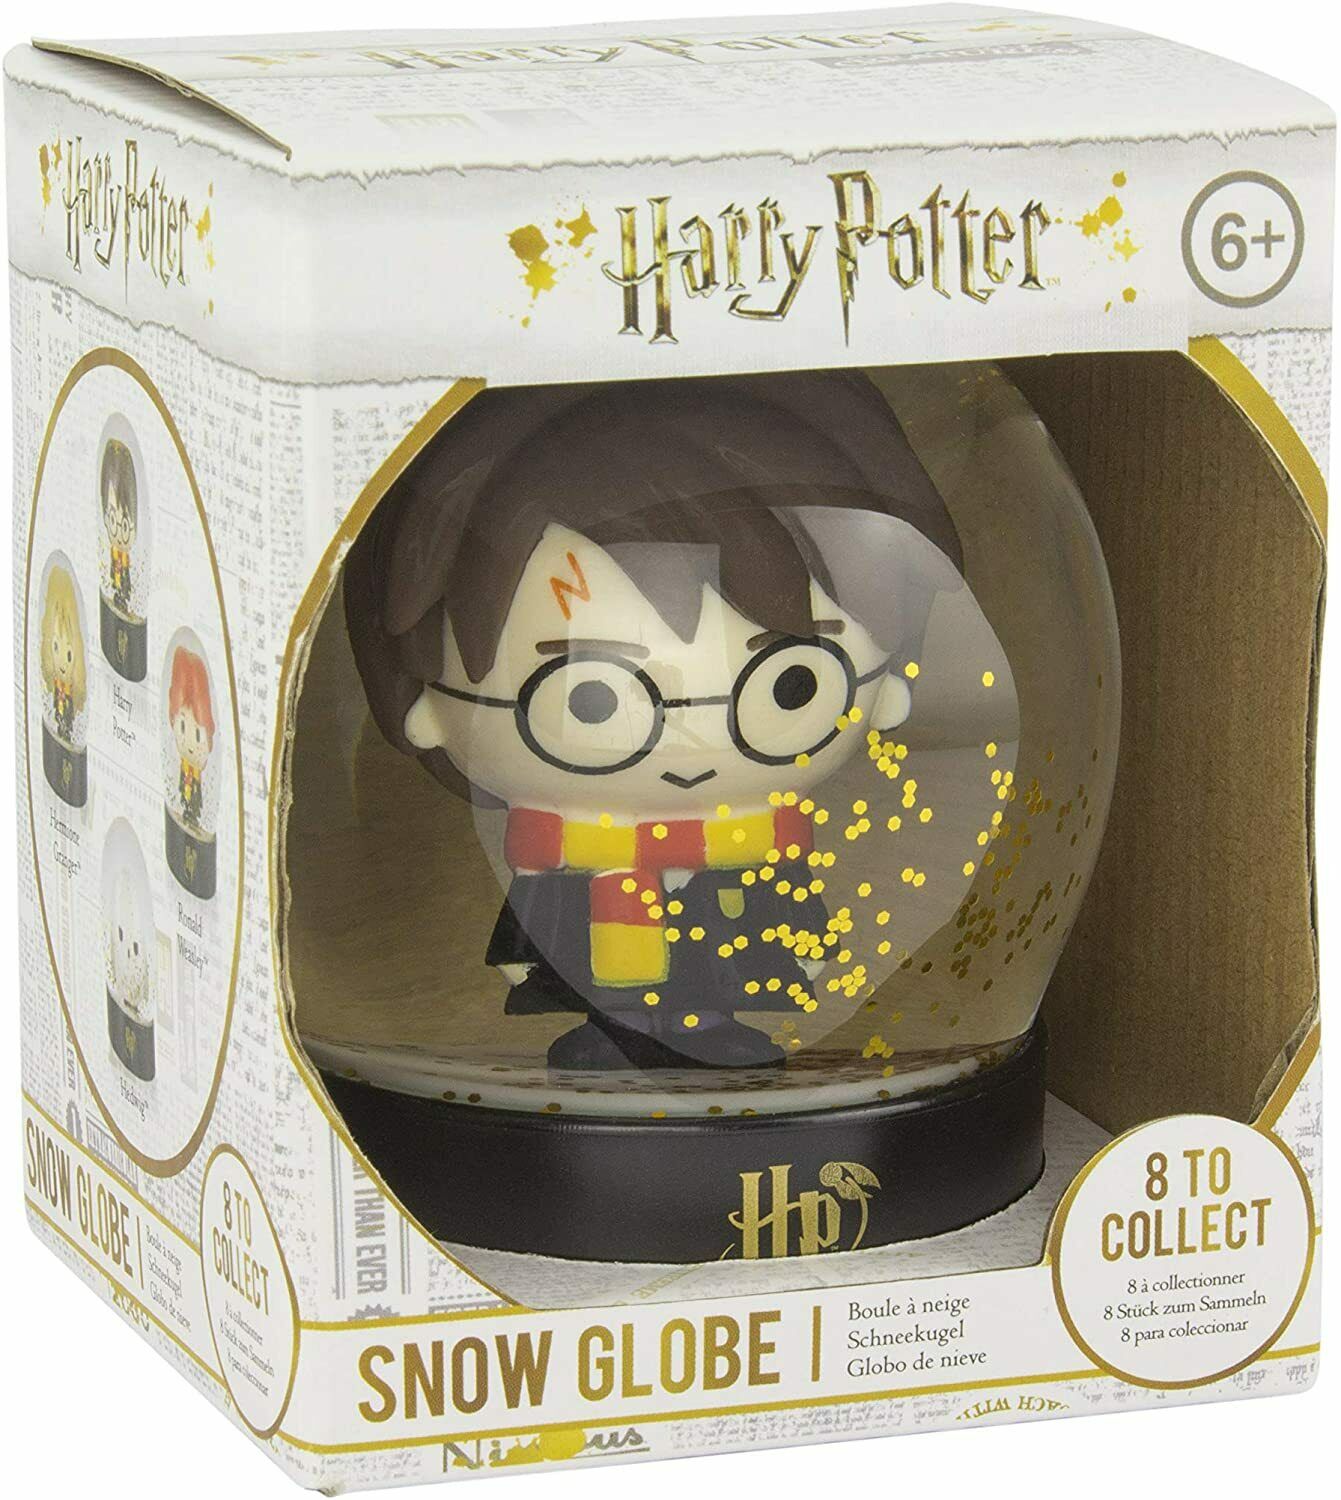 Official Harry Potter Xmas Snow Globe Gold Glitter Home Kids Gift Box Present